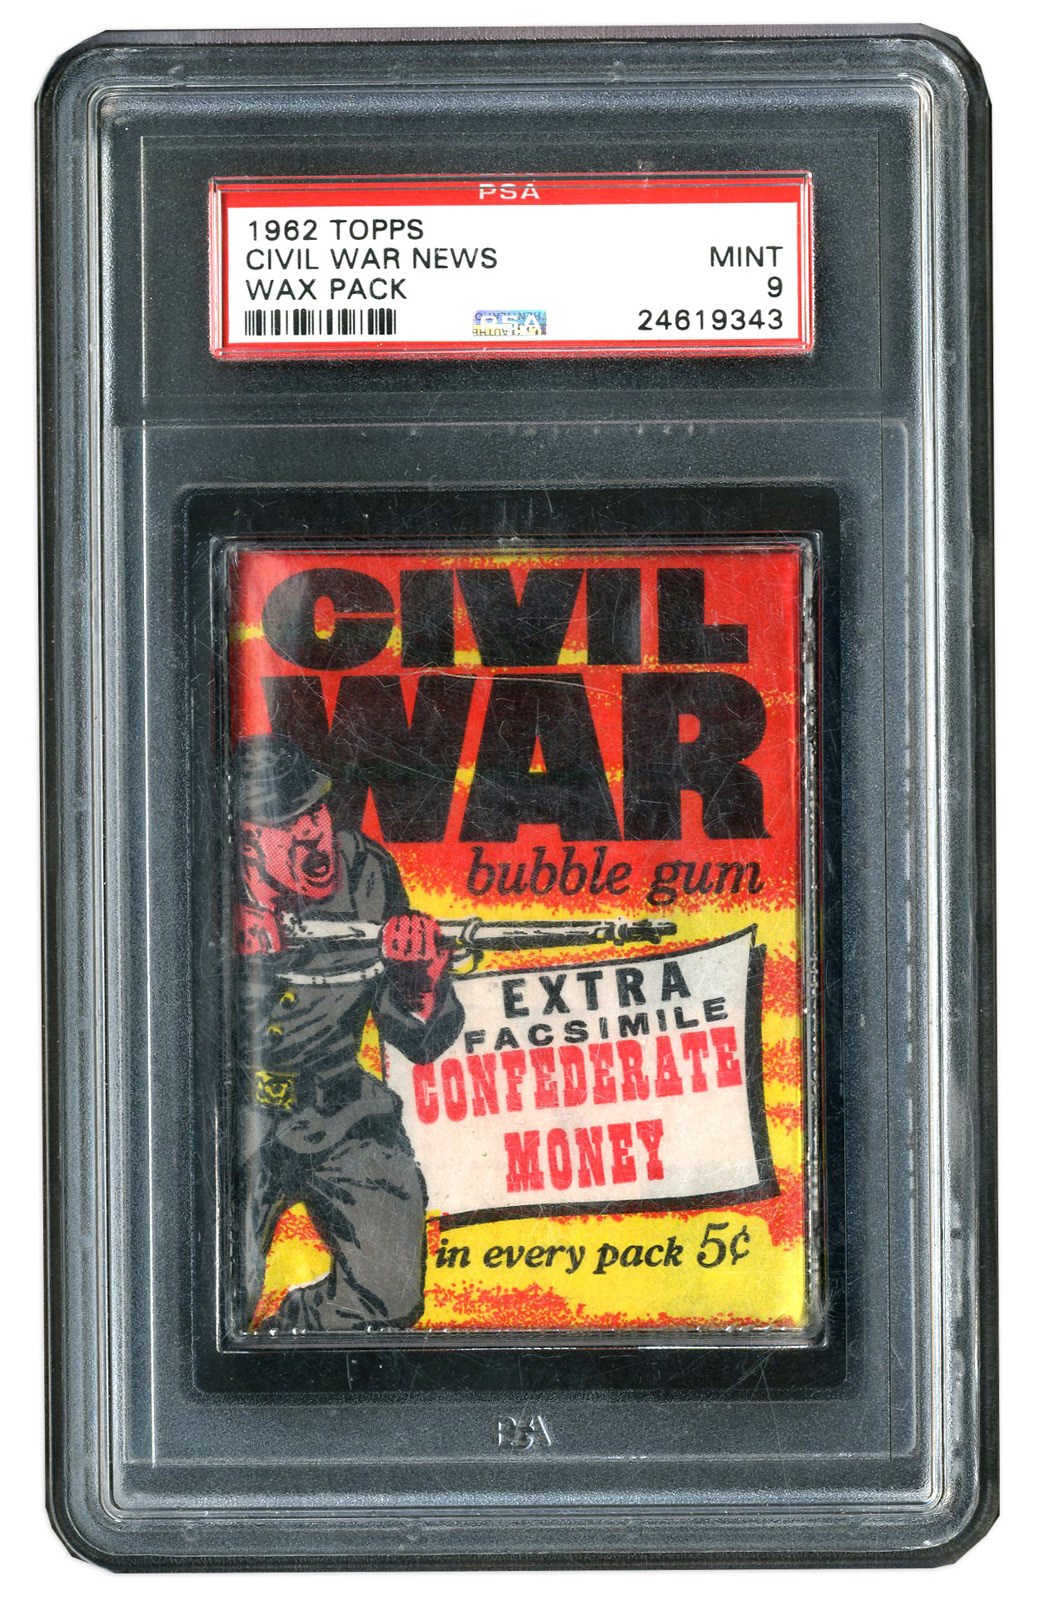 Baseball and Trading Cards - 1962 Topps Civil War News Unopenend Wax Pack - PSA MINT 9